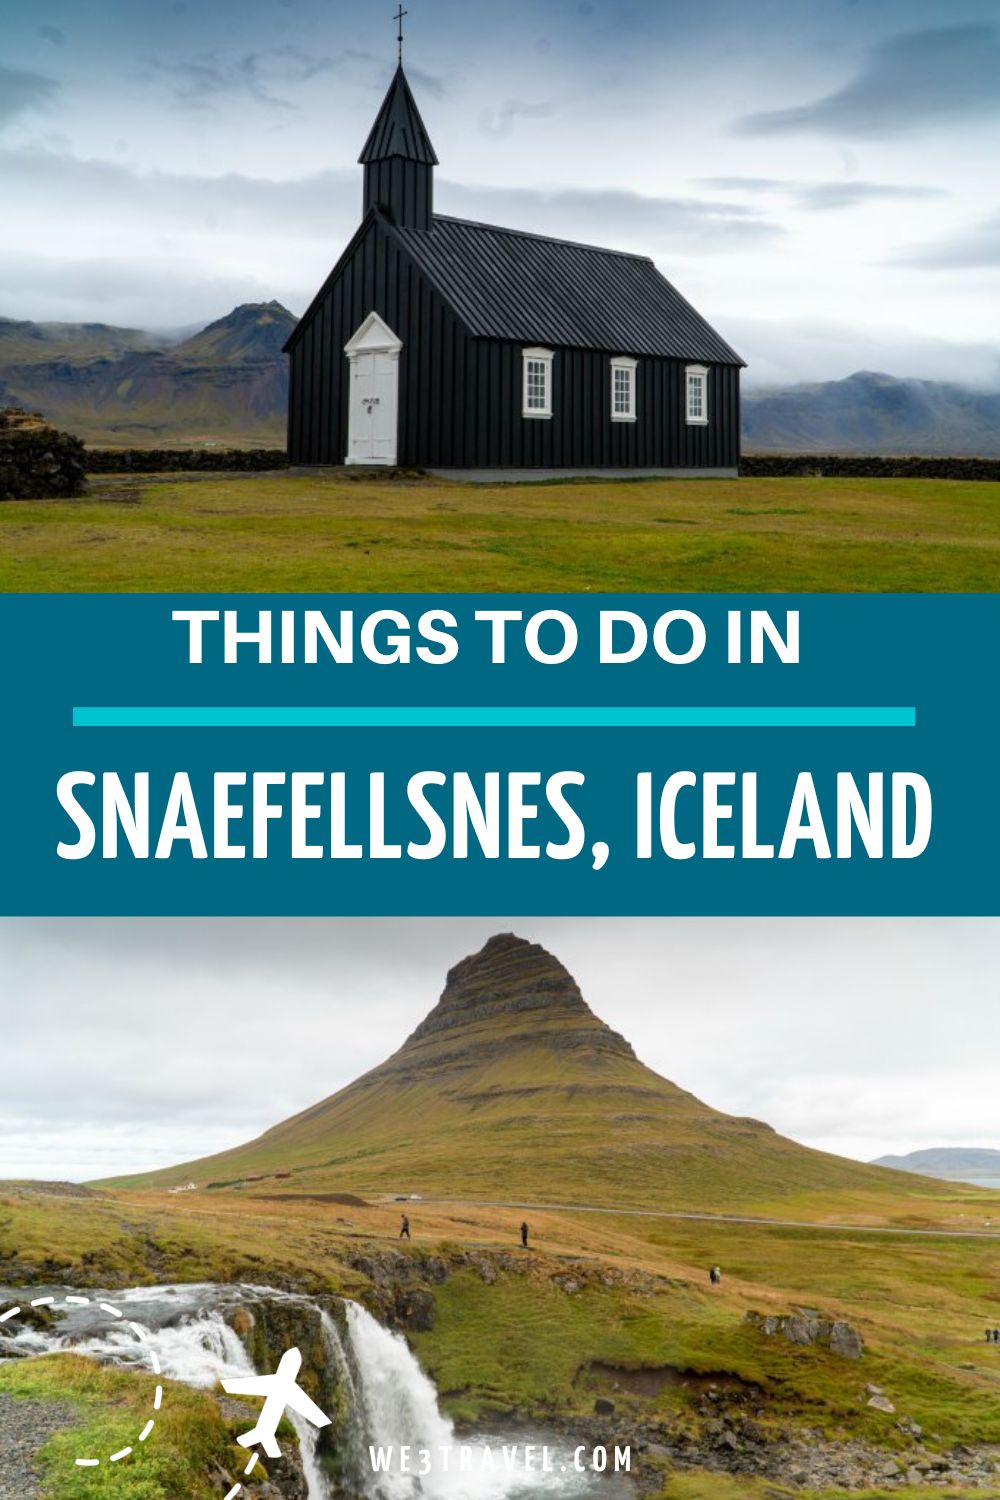 Things to do in the Snaefellness Peninsula in Iceland